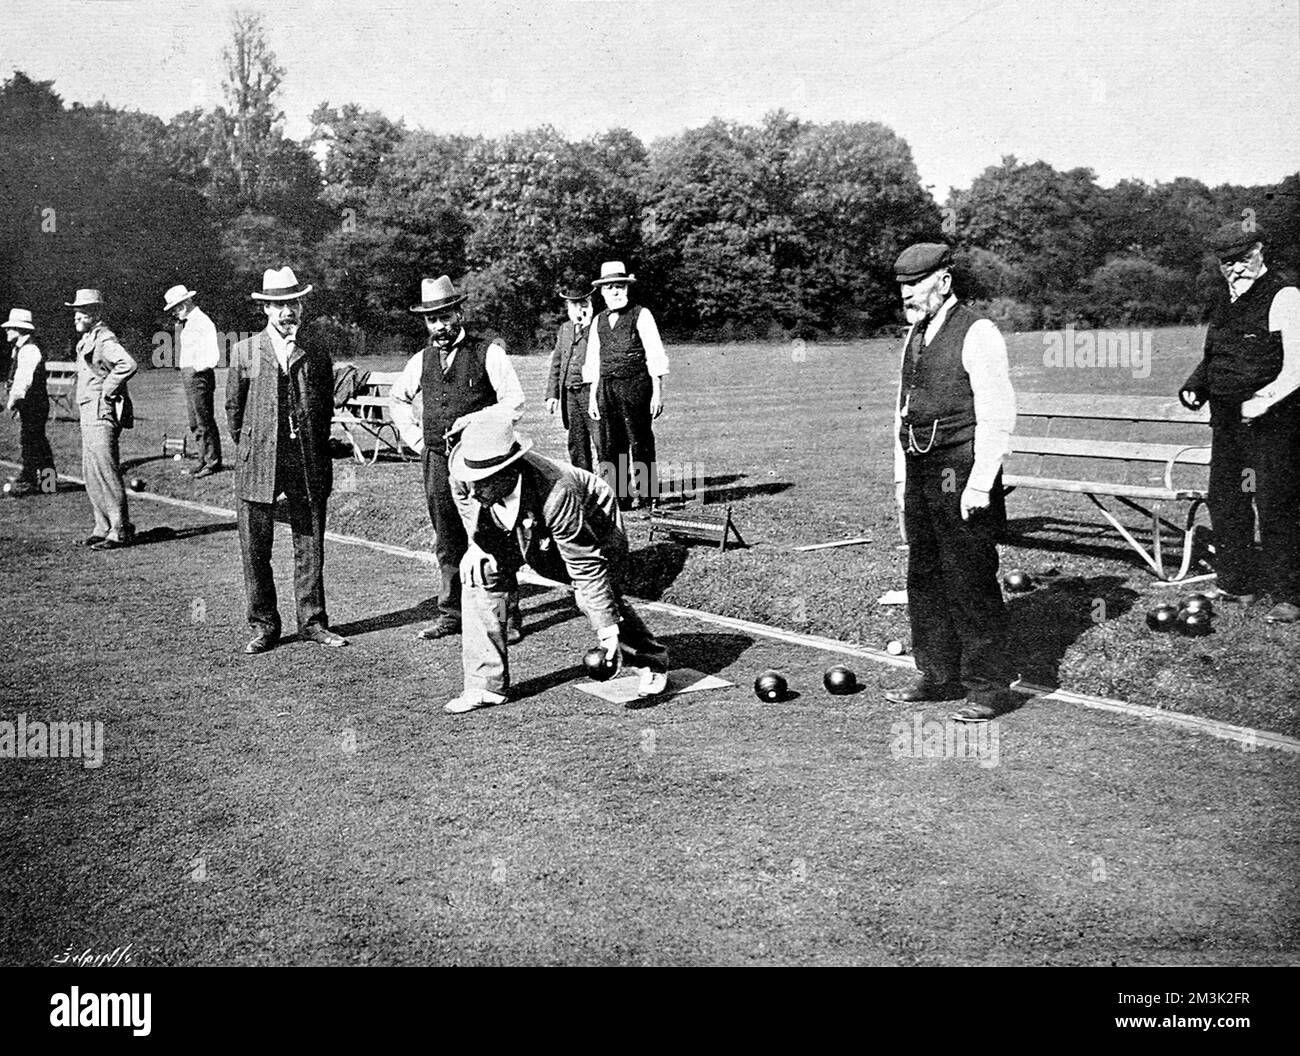 An English gentleman about to deliver his bowl during a game of lawn bowling. Fellow players and spectators closely watch his technique. Stock Photo